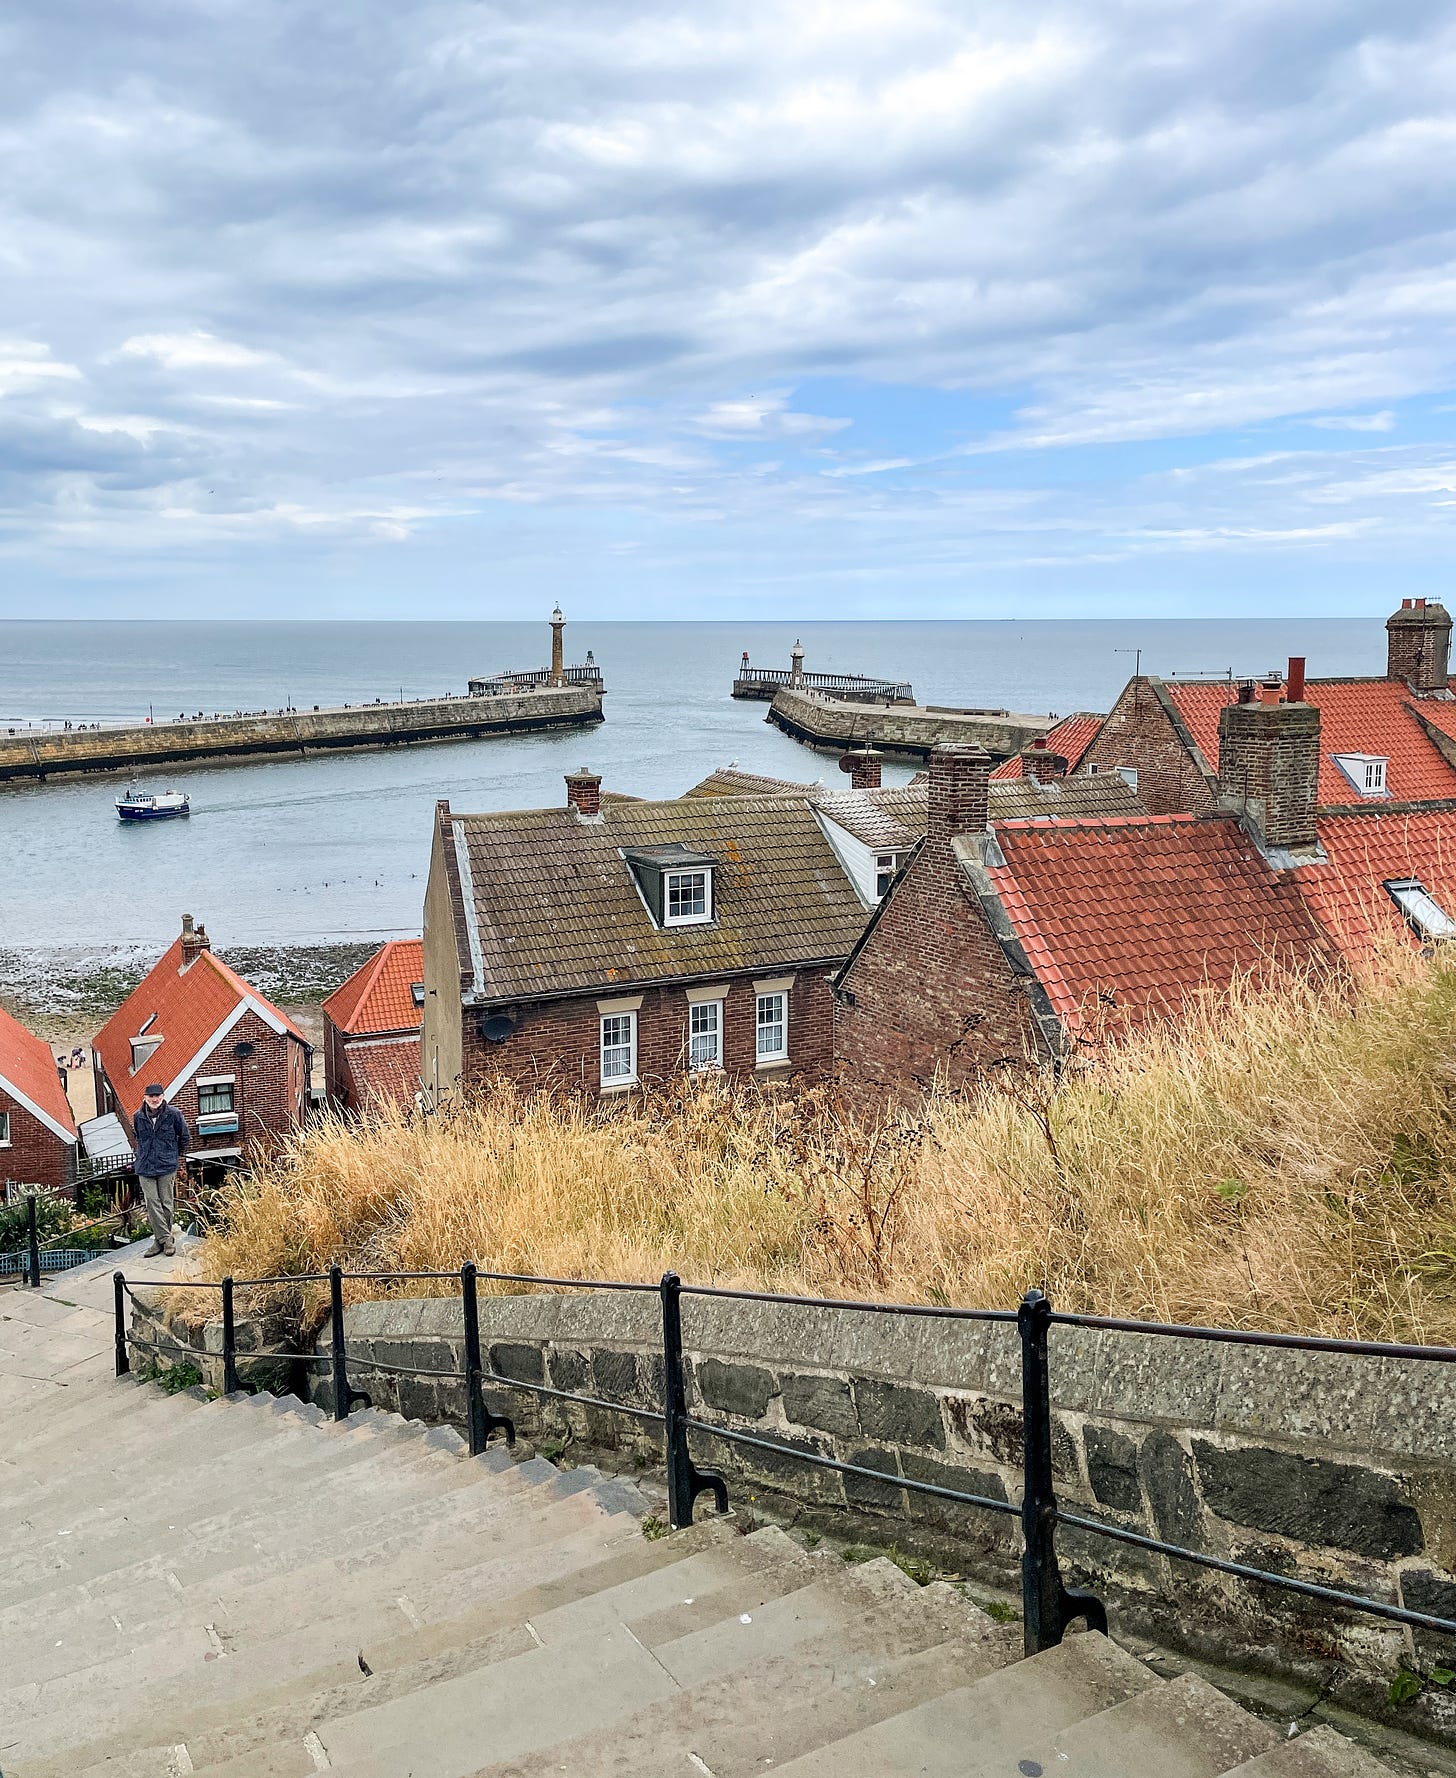 The 199 steps, Whitby, England